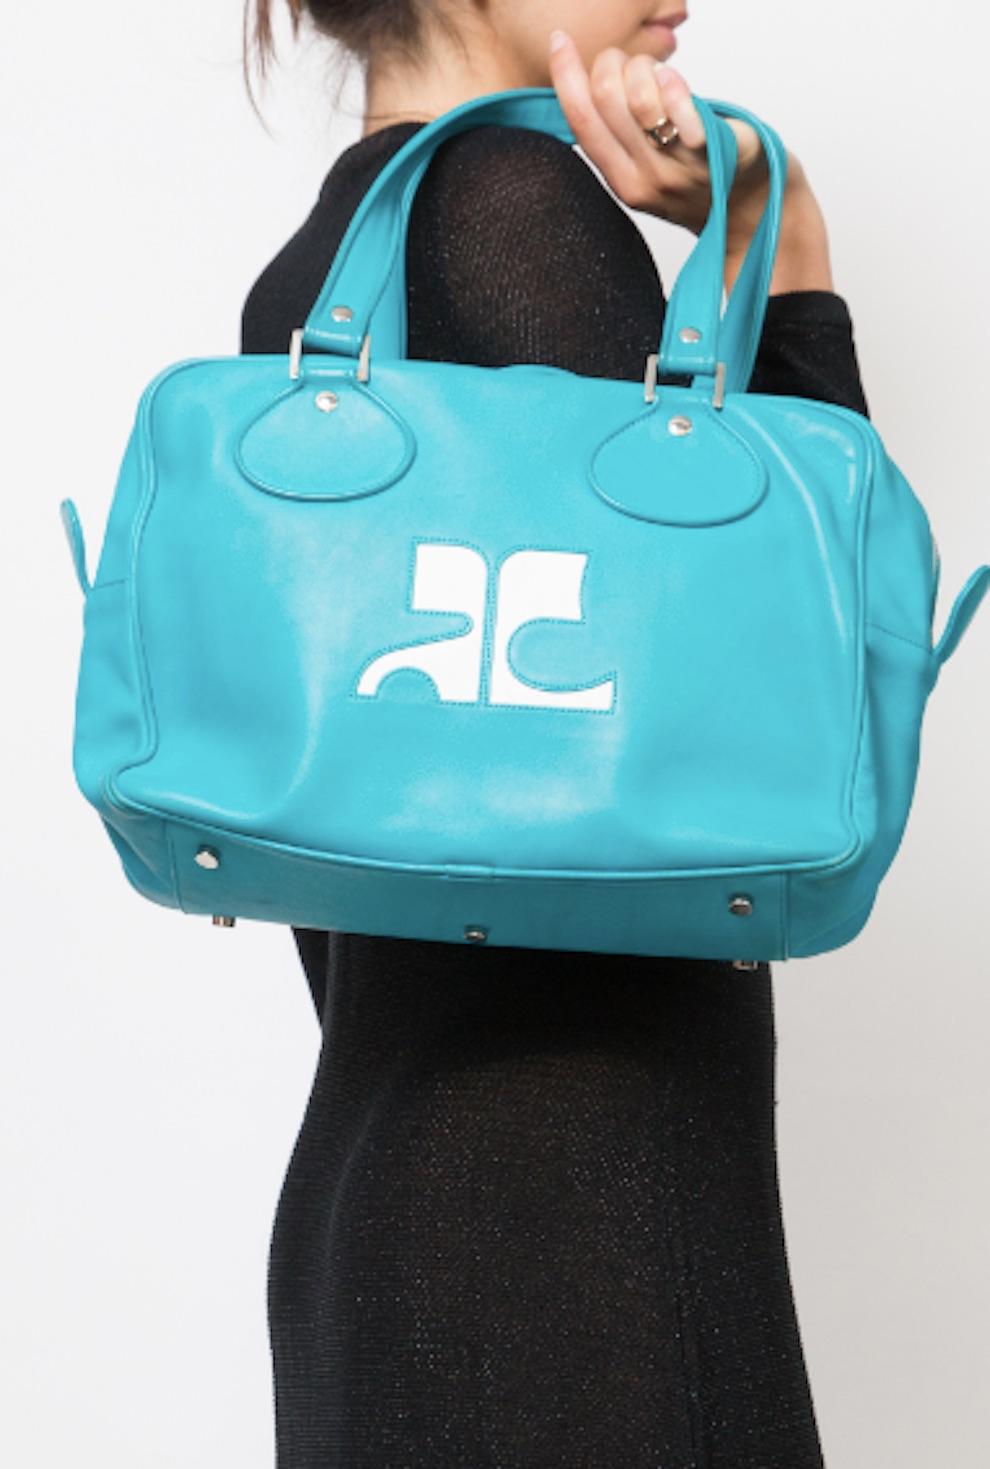 Courreges turquoise large Bowling handbag featuring two top handles, silver-tone hardware, a large front white logo inside zipped pocket, an inside logo patch. 
Circa: 2000s
Length: 13.4in. (34cm)
Height: 9.4in. (24cm)
Depth:4.3in. (11cm)
In good